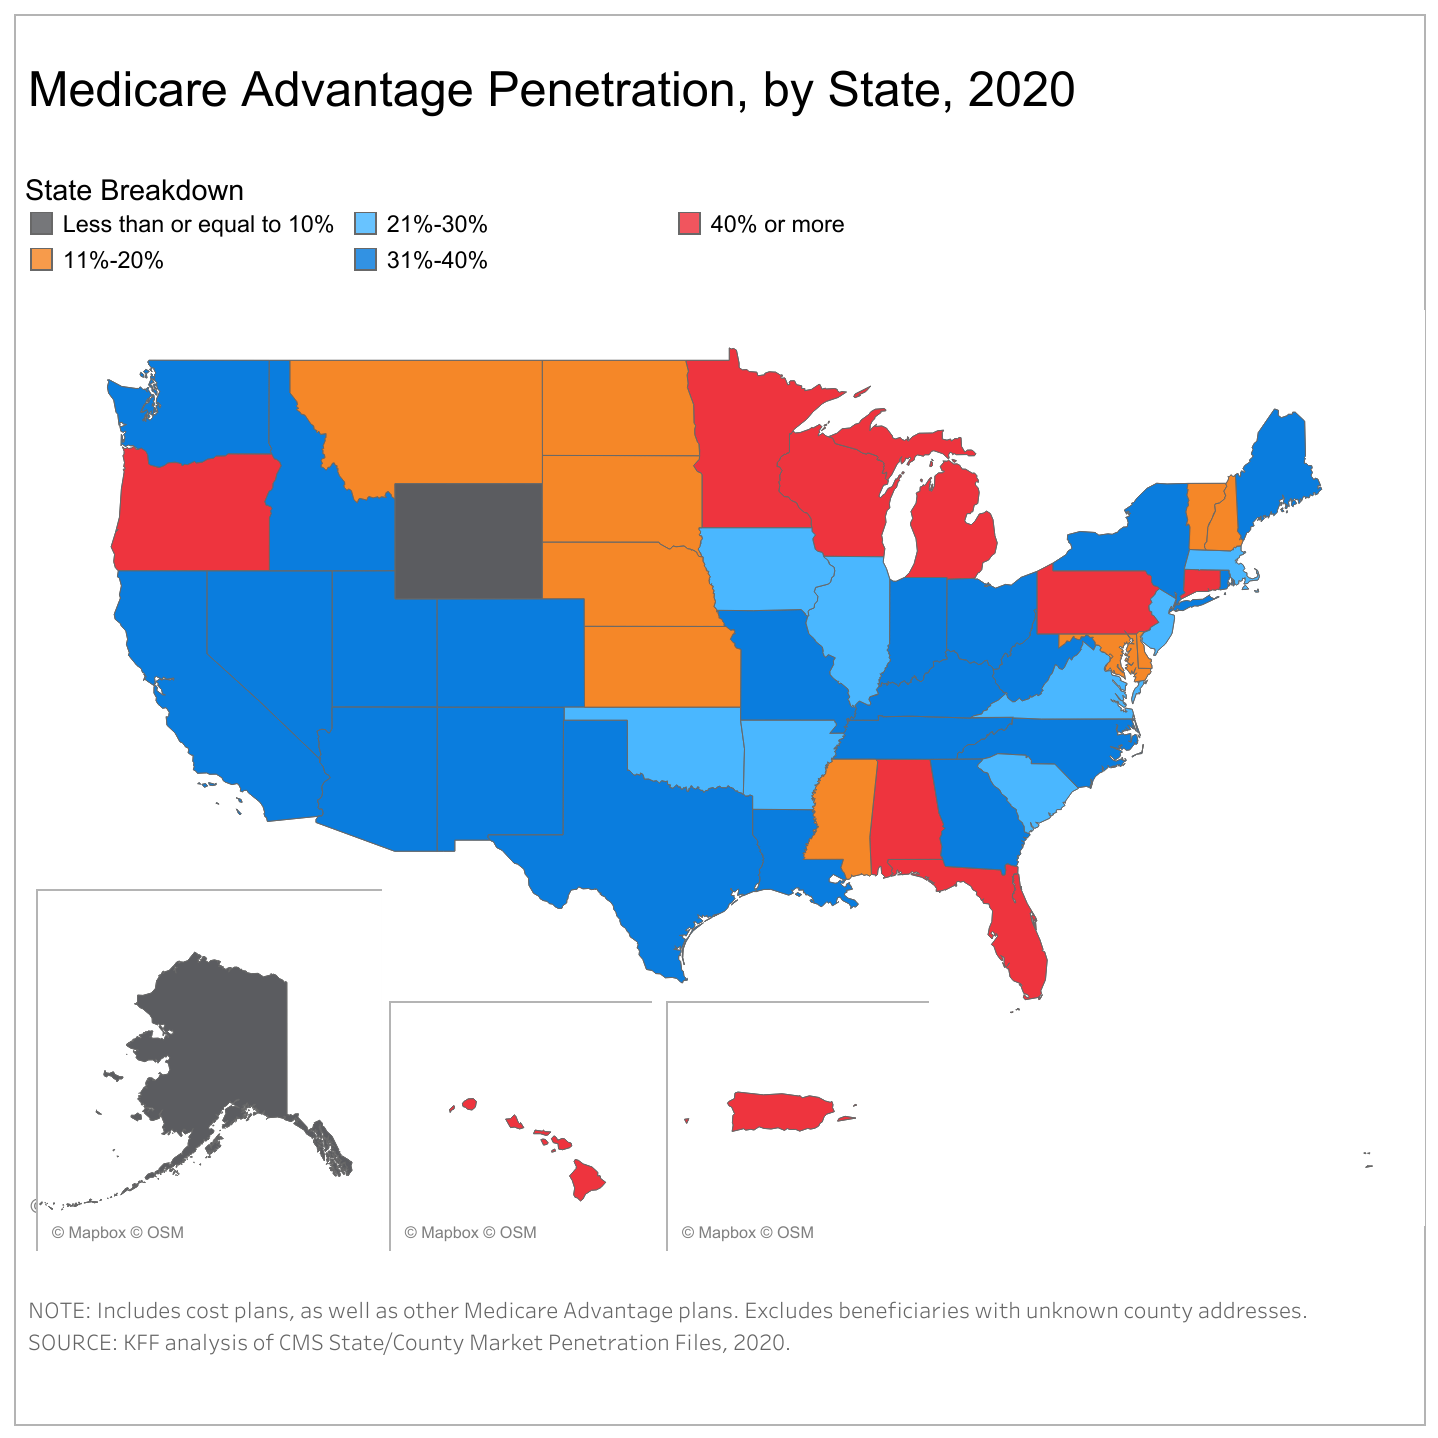 MA_penetration-by-state-2020